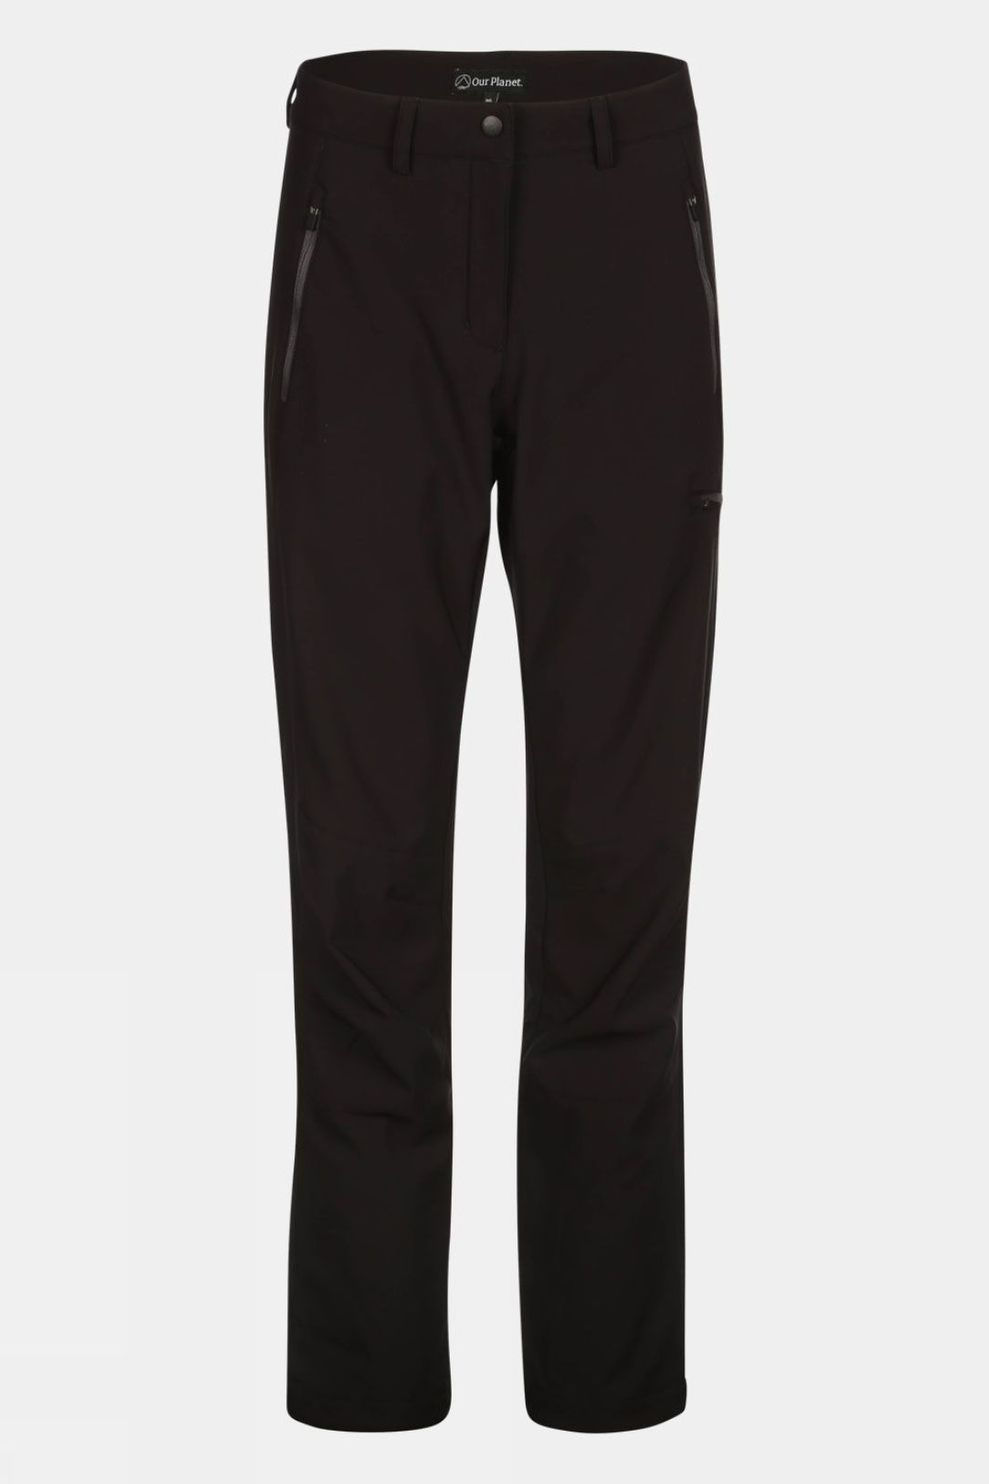 Our Planet Womens Cenote Softshell Trousers